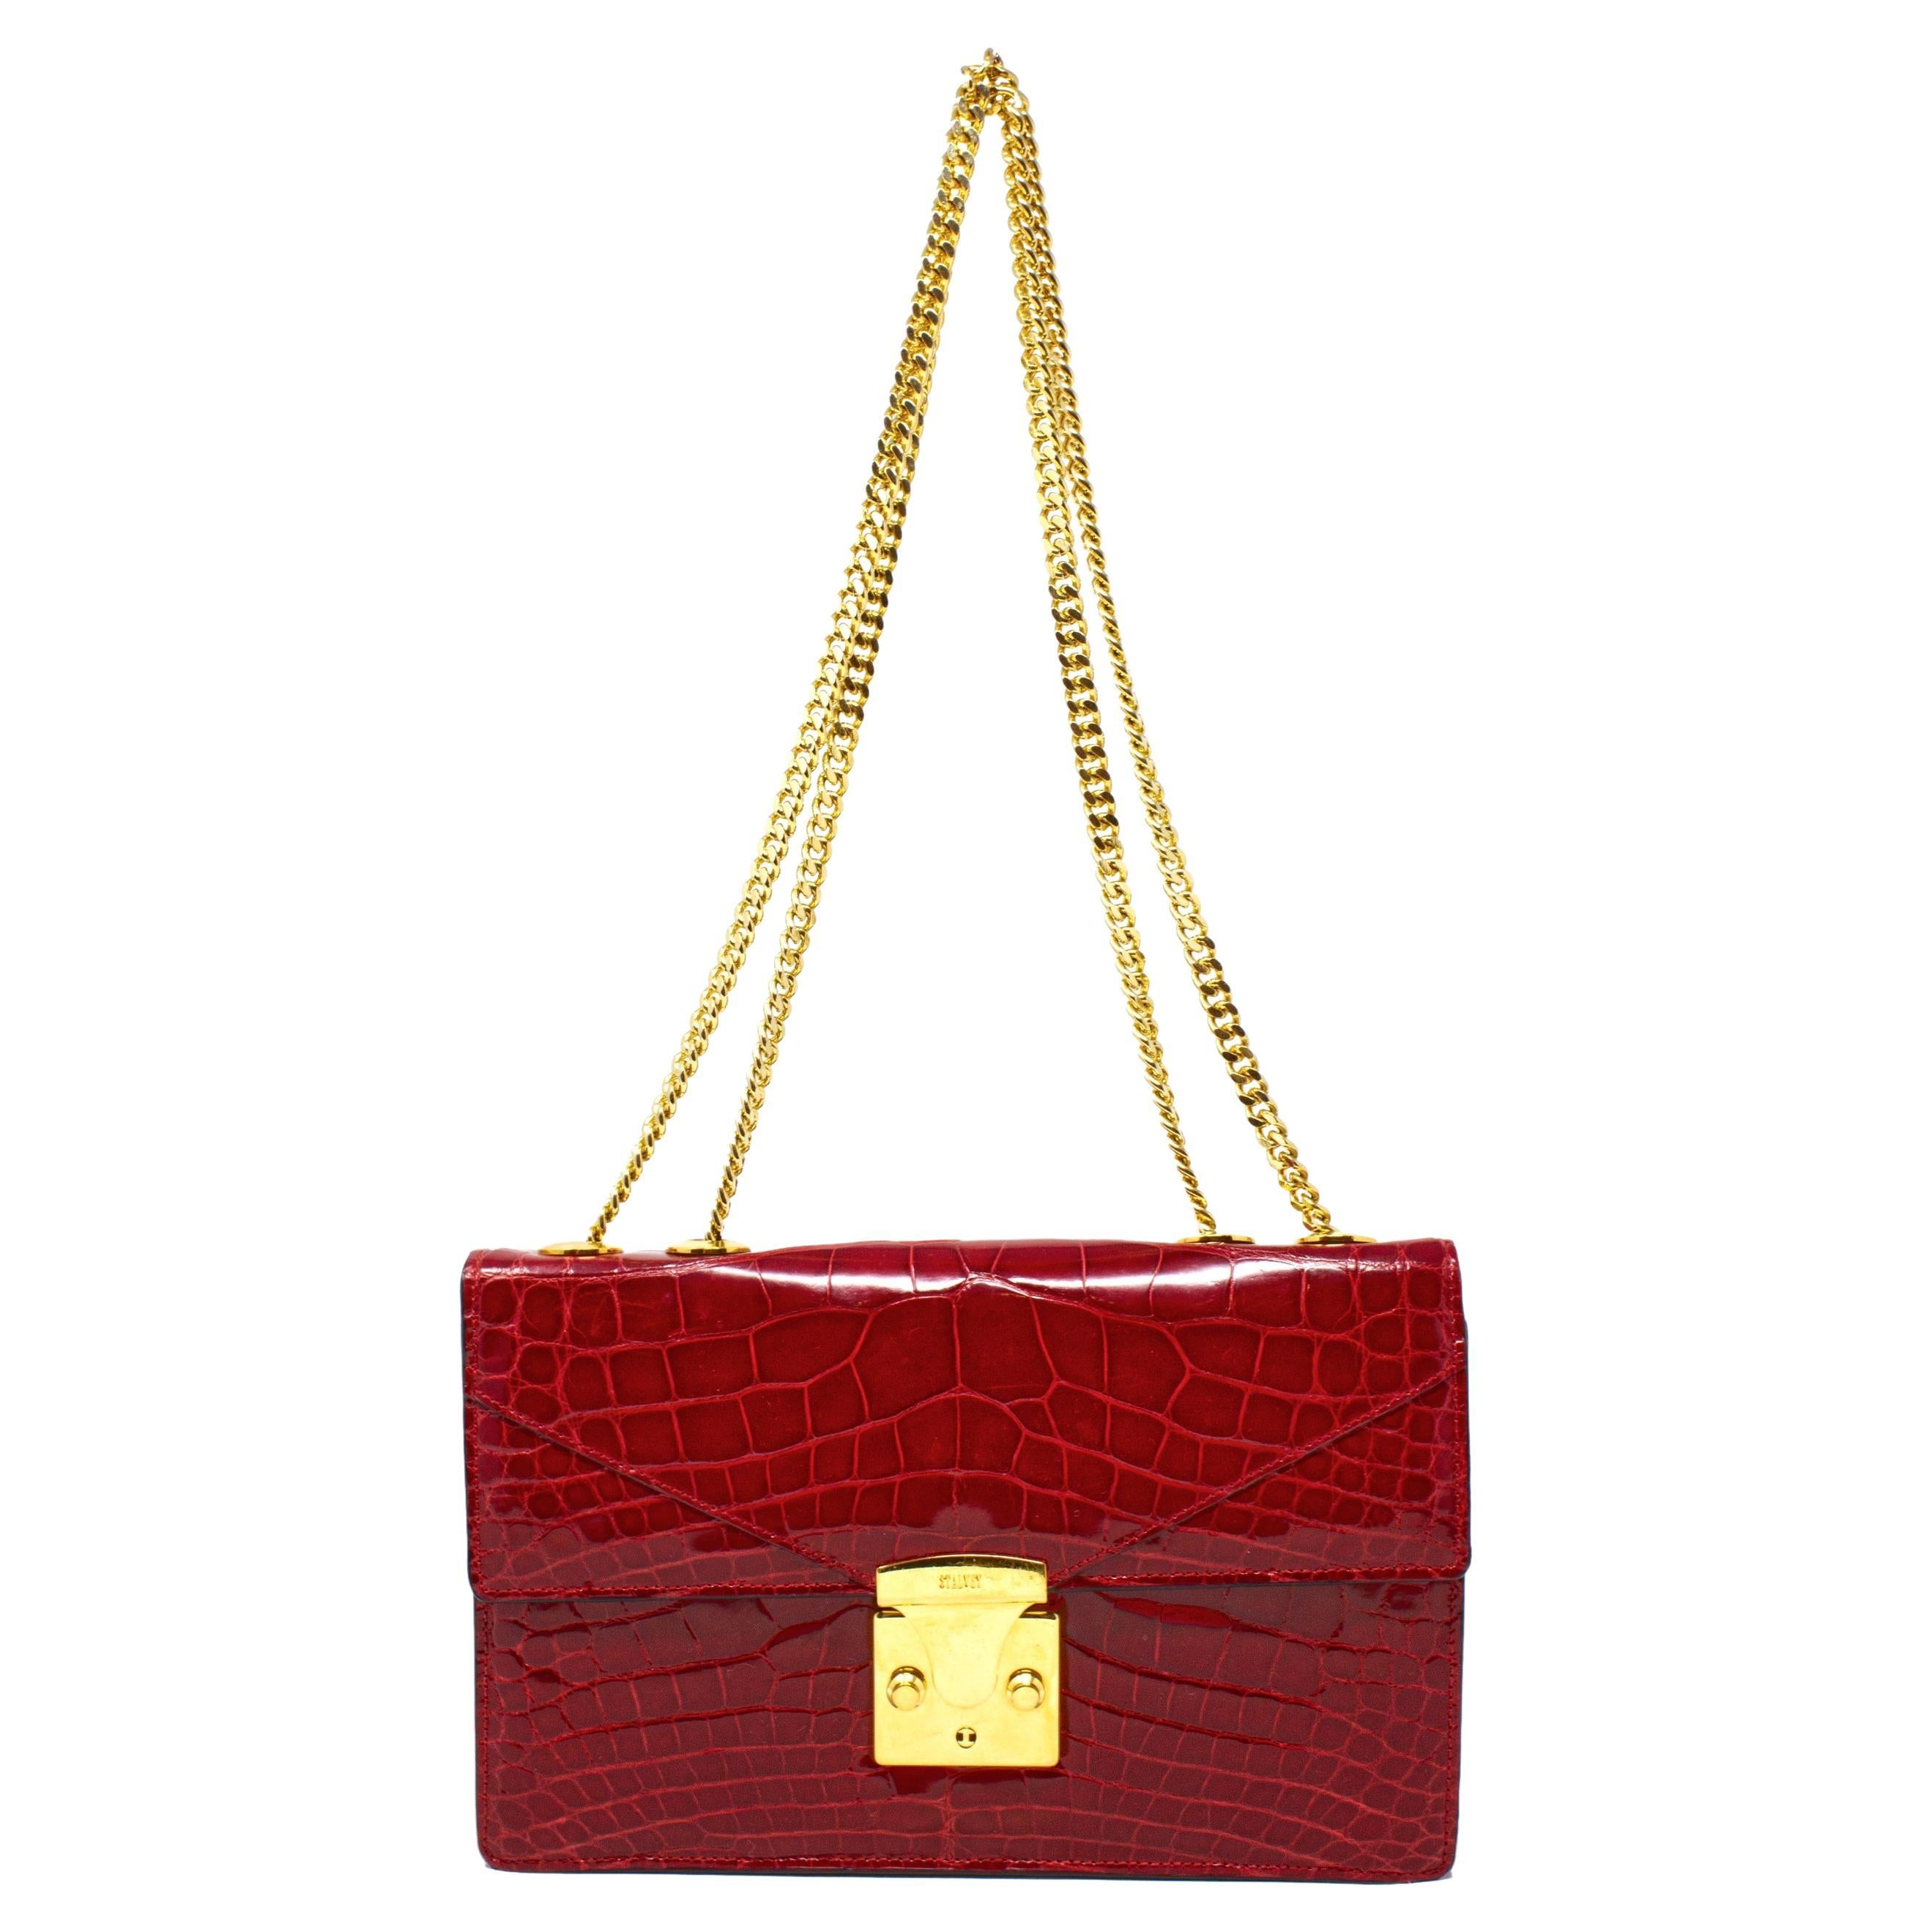 Chanel Dallas Collection Bag Python Red